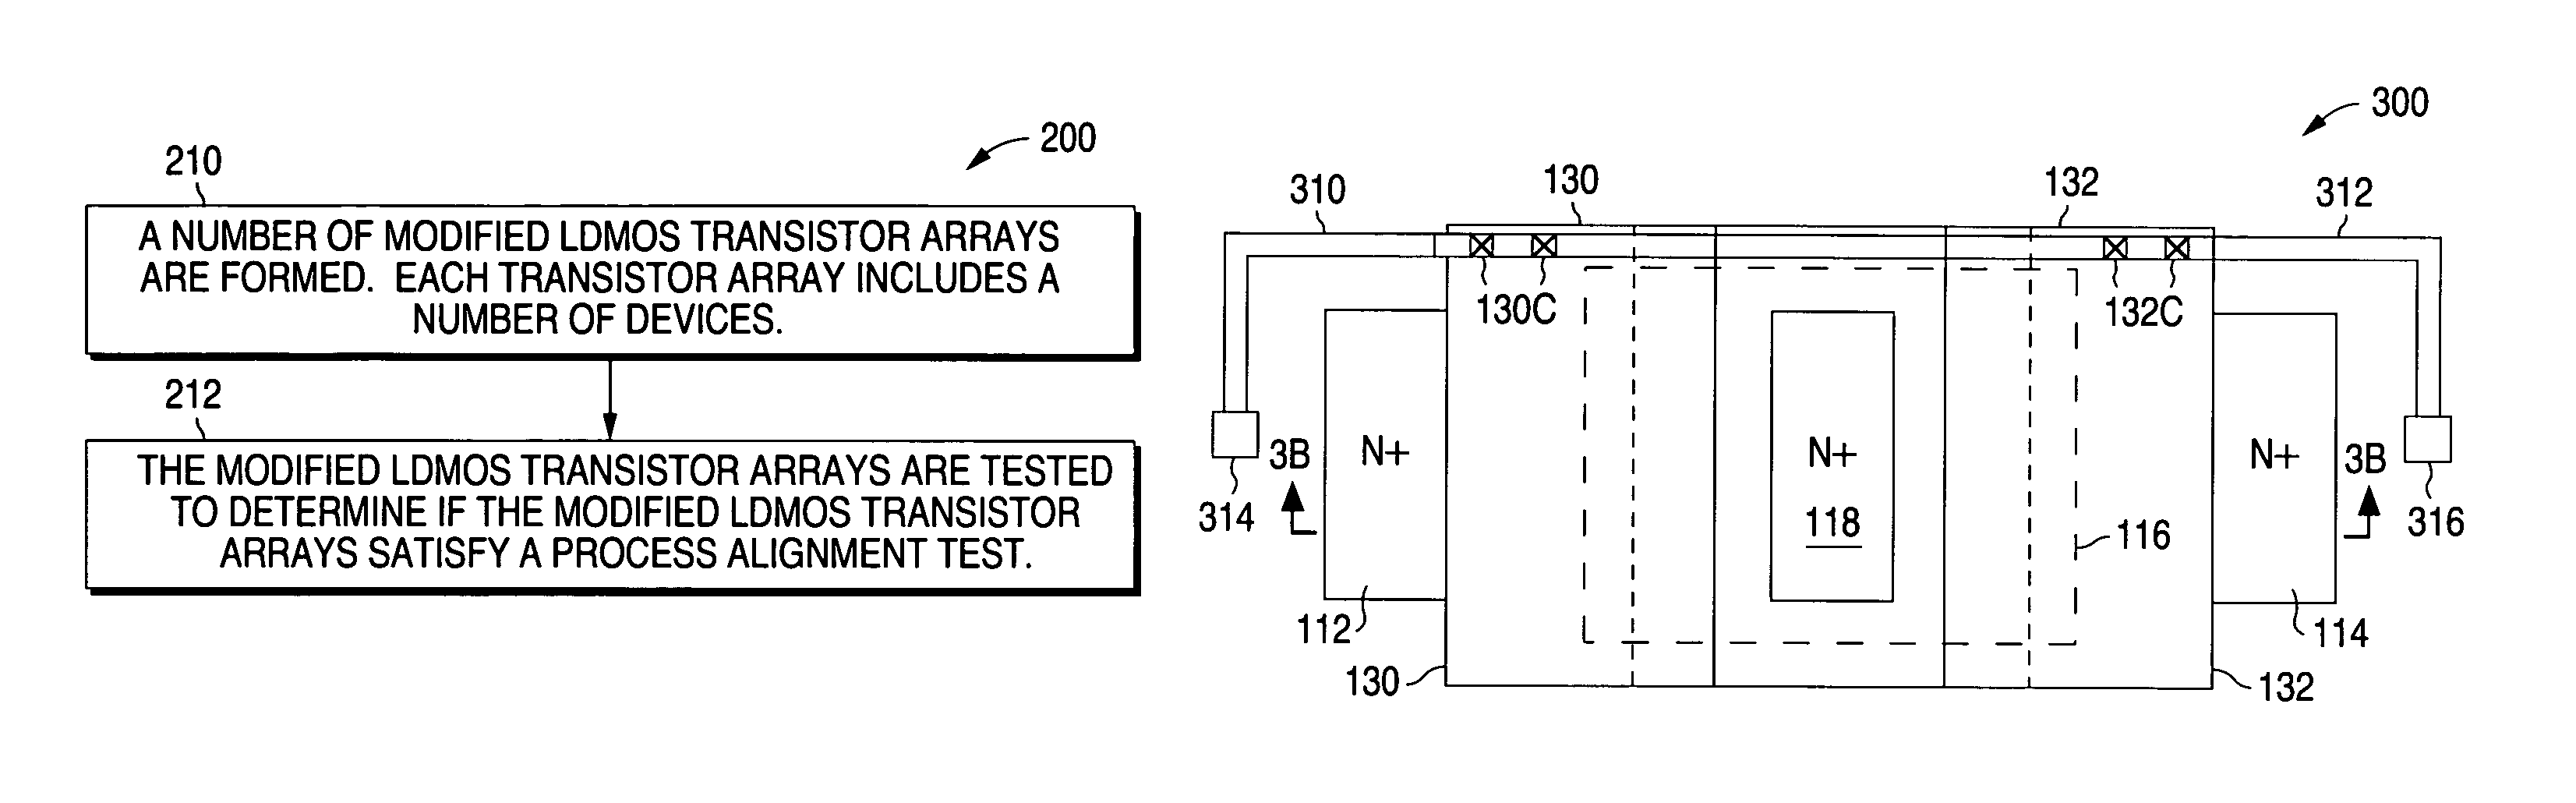 Method of monitoring process misalignment to reduce asymmetric device operation and improve the electrical and hot carrier performance of LDMOS transistor arrays